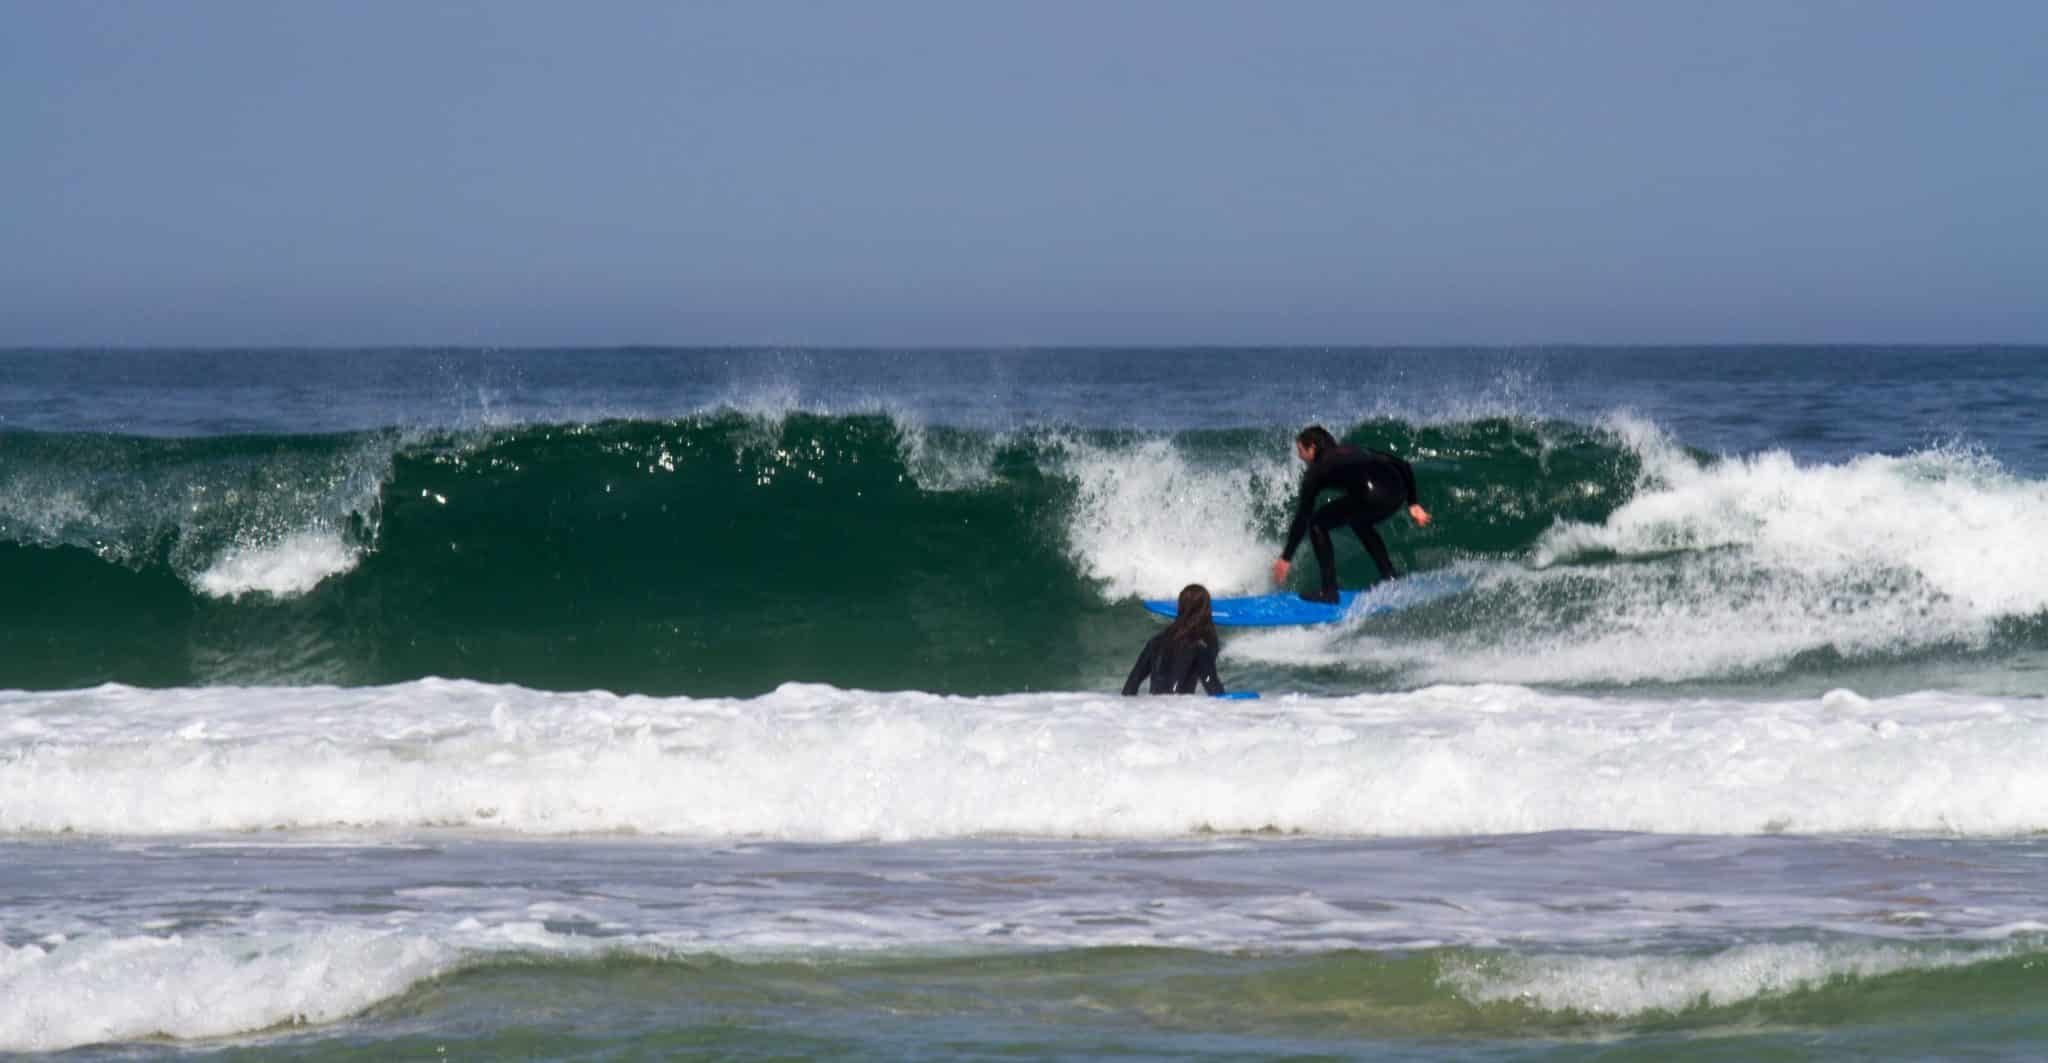 a surfer learning to surf on a wave and another person watching from the water